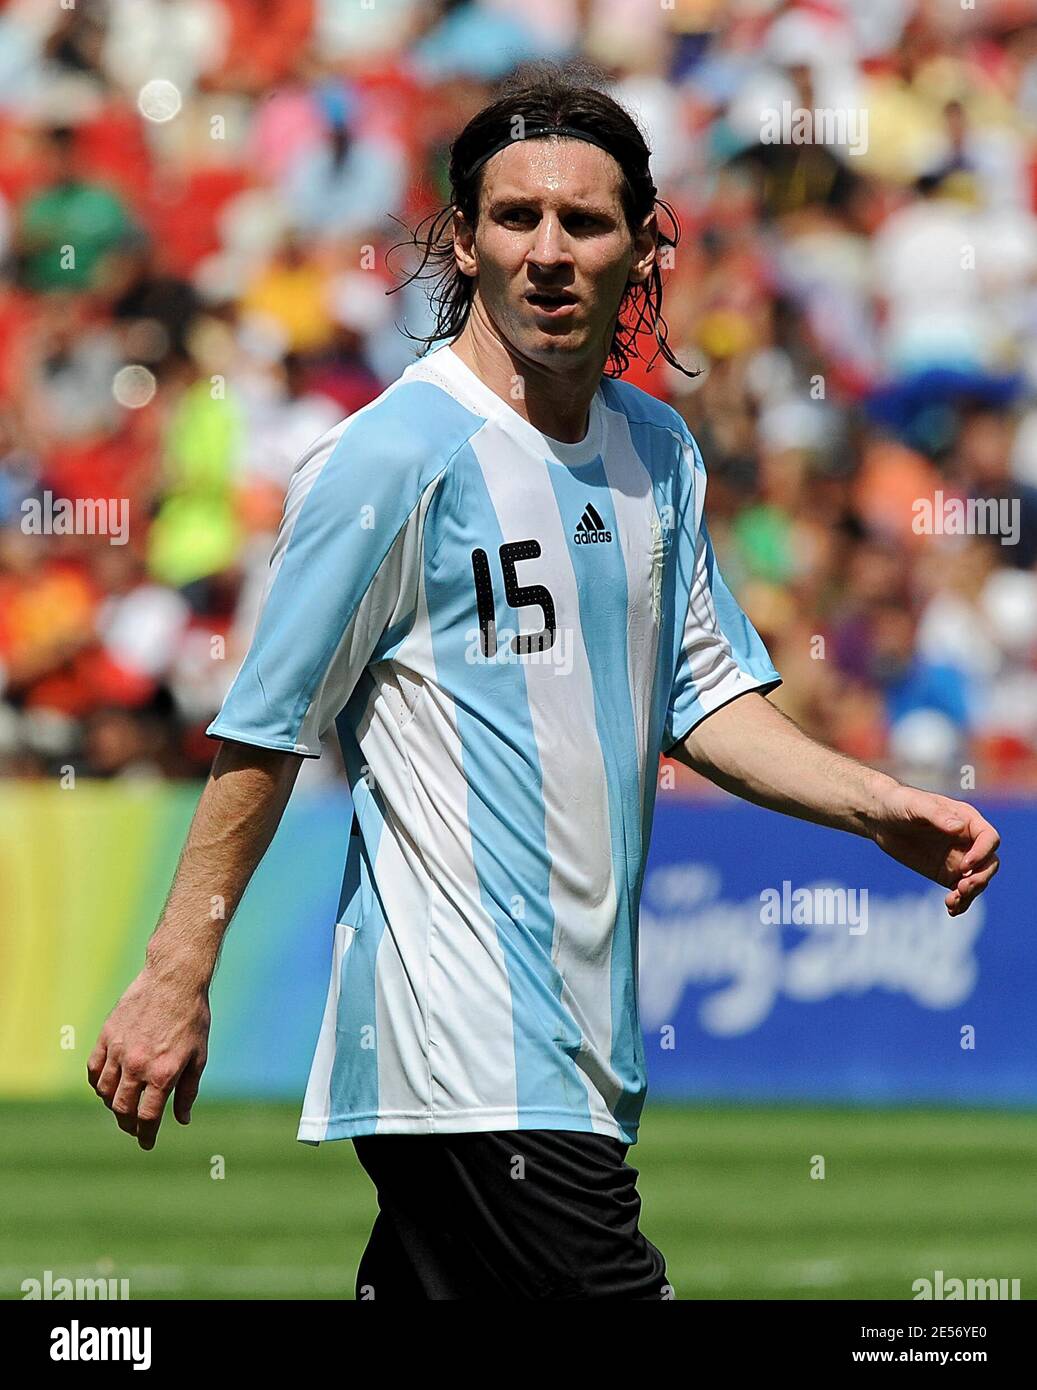 Argentina's Lionel Messi during the Men's Gold Medal football match between  Nigeria and Argentina of Beijing 2008 Olympic Games on Day 15 at the  National Stadium in Beijing, China on August 23,